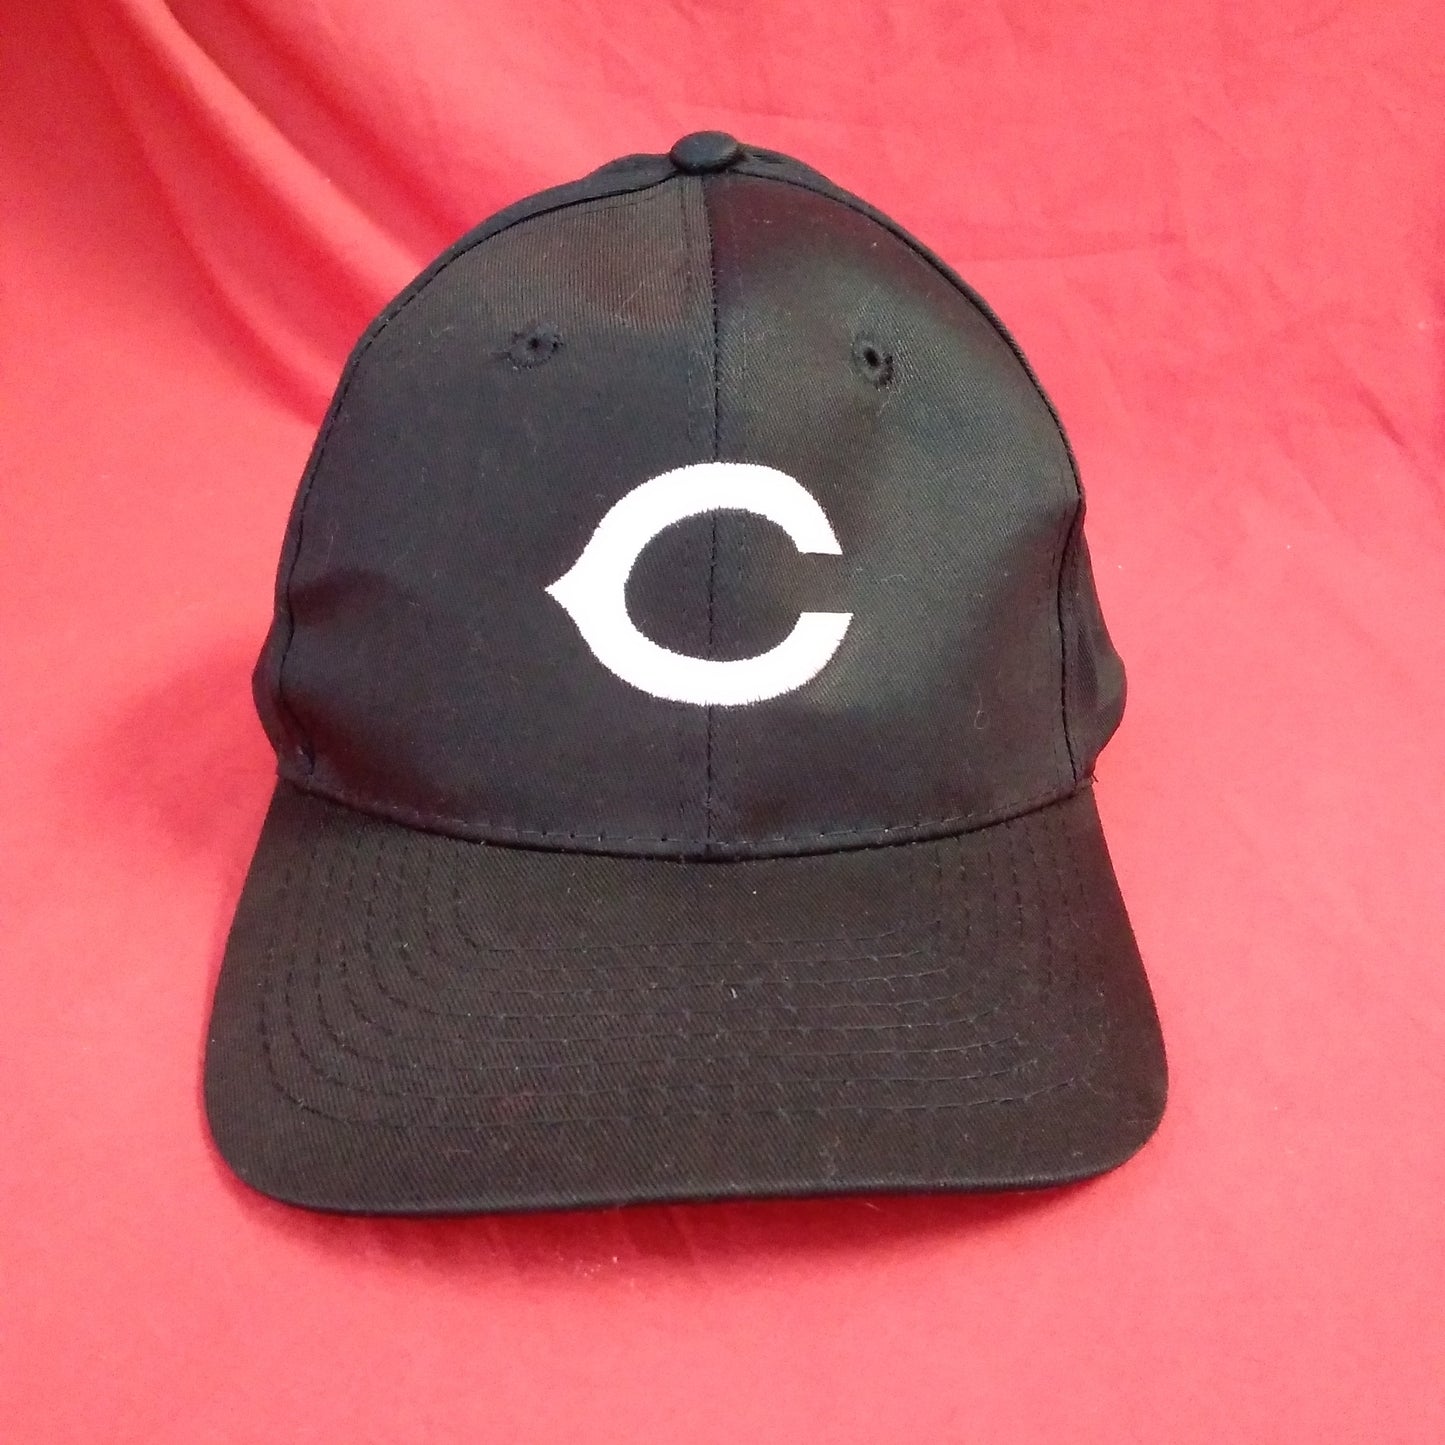 New - Black Cap with Silver "C" Logo by Cobra Caps - One Size Fits All